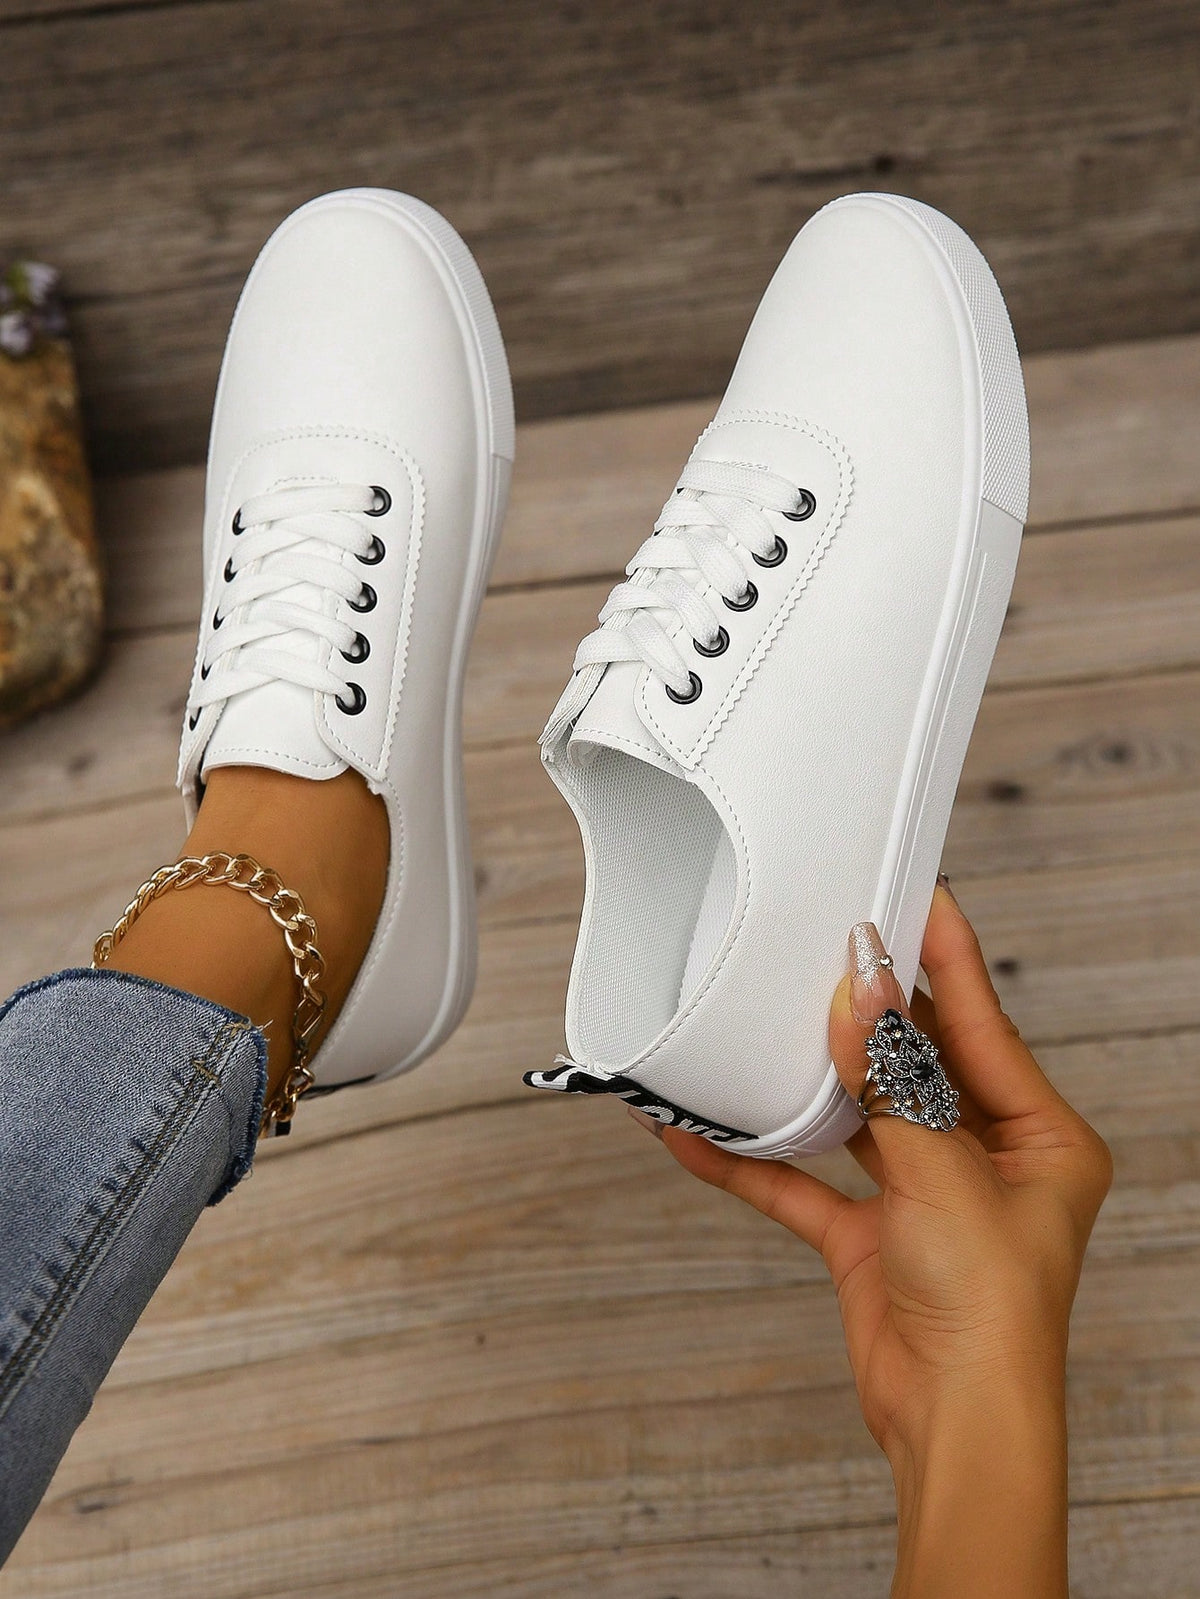 Women's Chunky Sneakers Thick-soled Platform Running Shoes